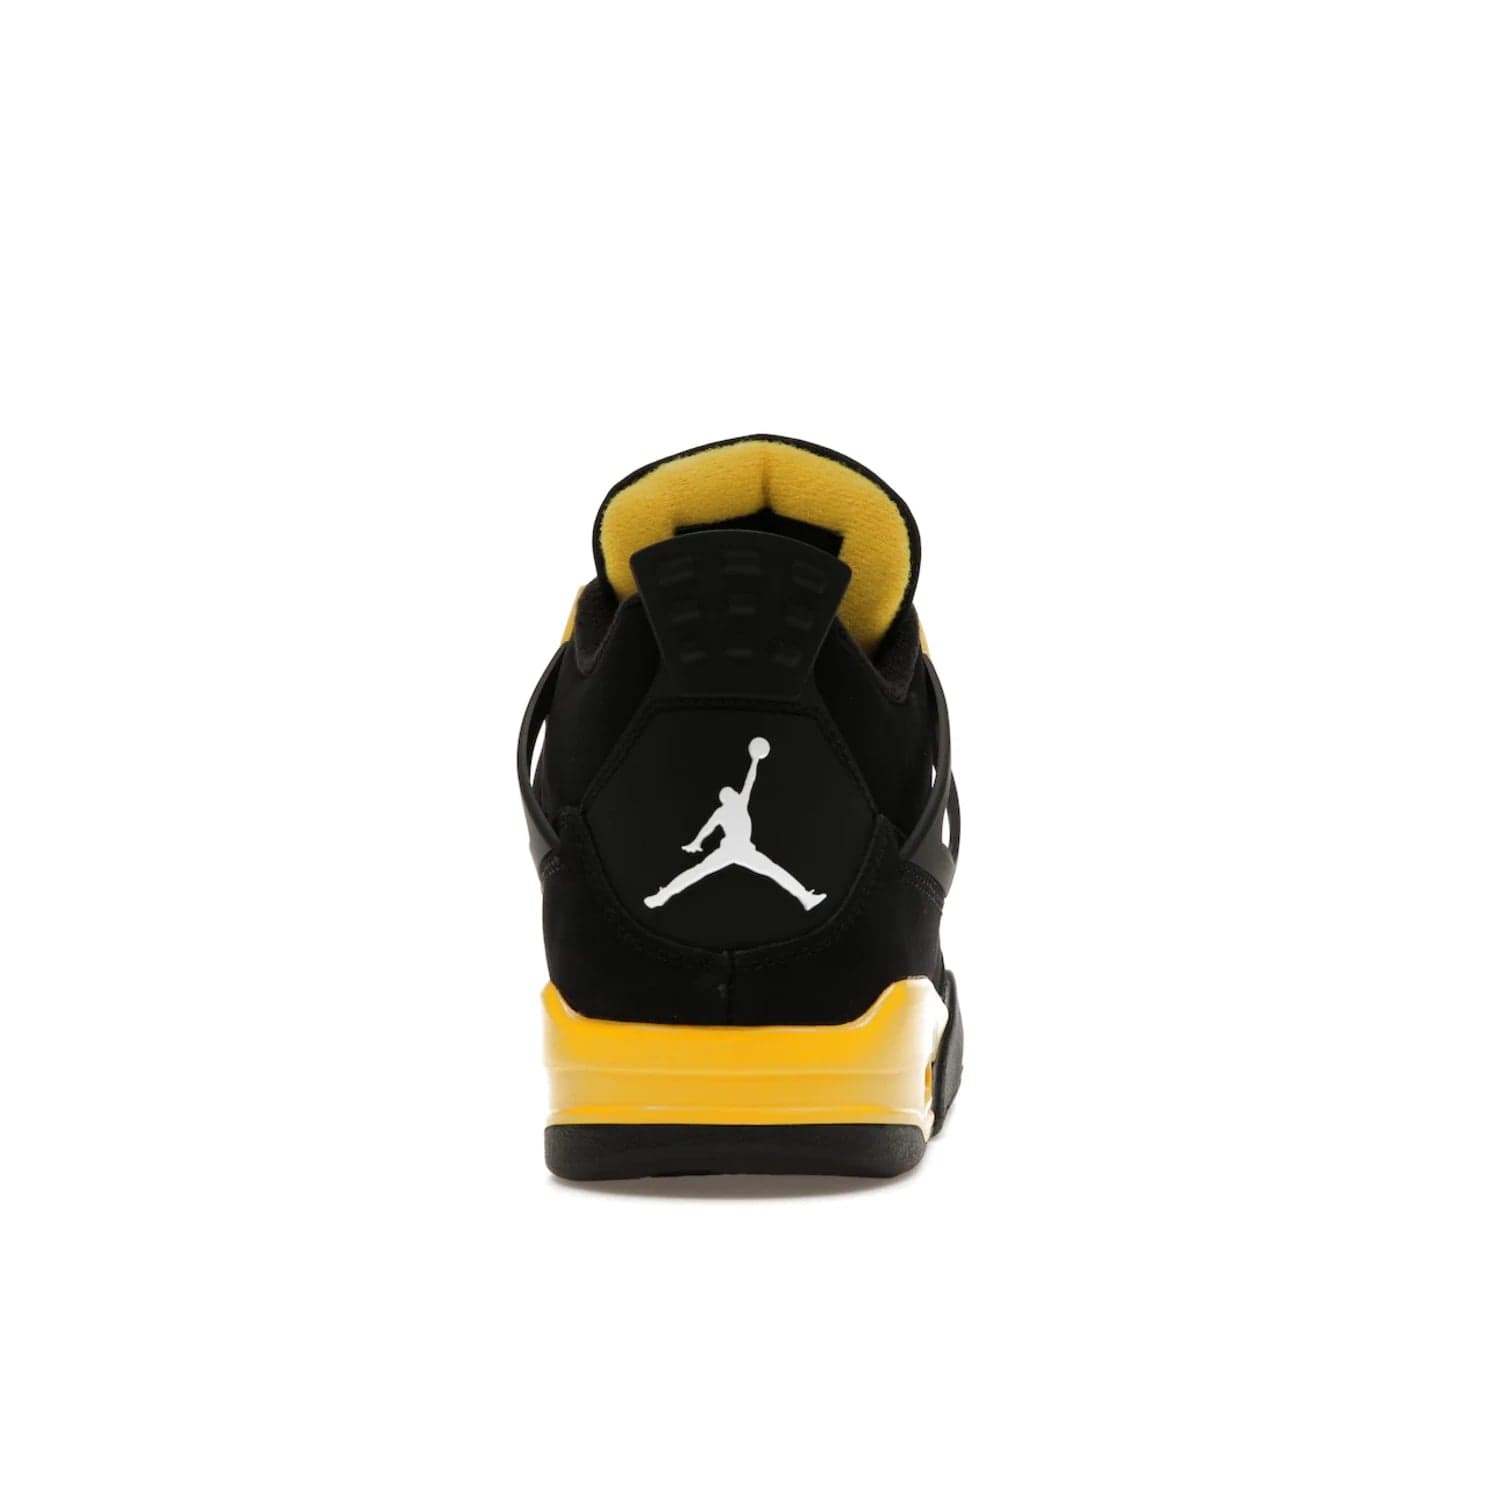 Jordan 4 Retro Thunder (2023) - Image 28 - Only at www.BallersClubKickz.com - Iconic Air Jordan 4 Retro Thunder (2023) returns with black nubuck upper and Tour Yellow details. Featuring Jumpman logo on heel tab, tongue and insoles. Dropping May 13th, 2023.